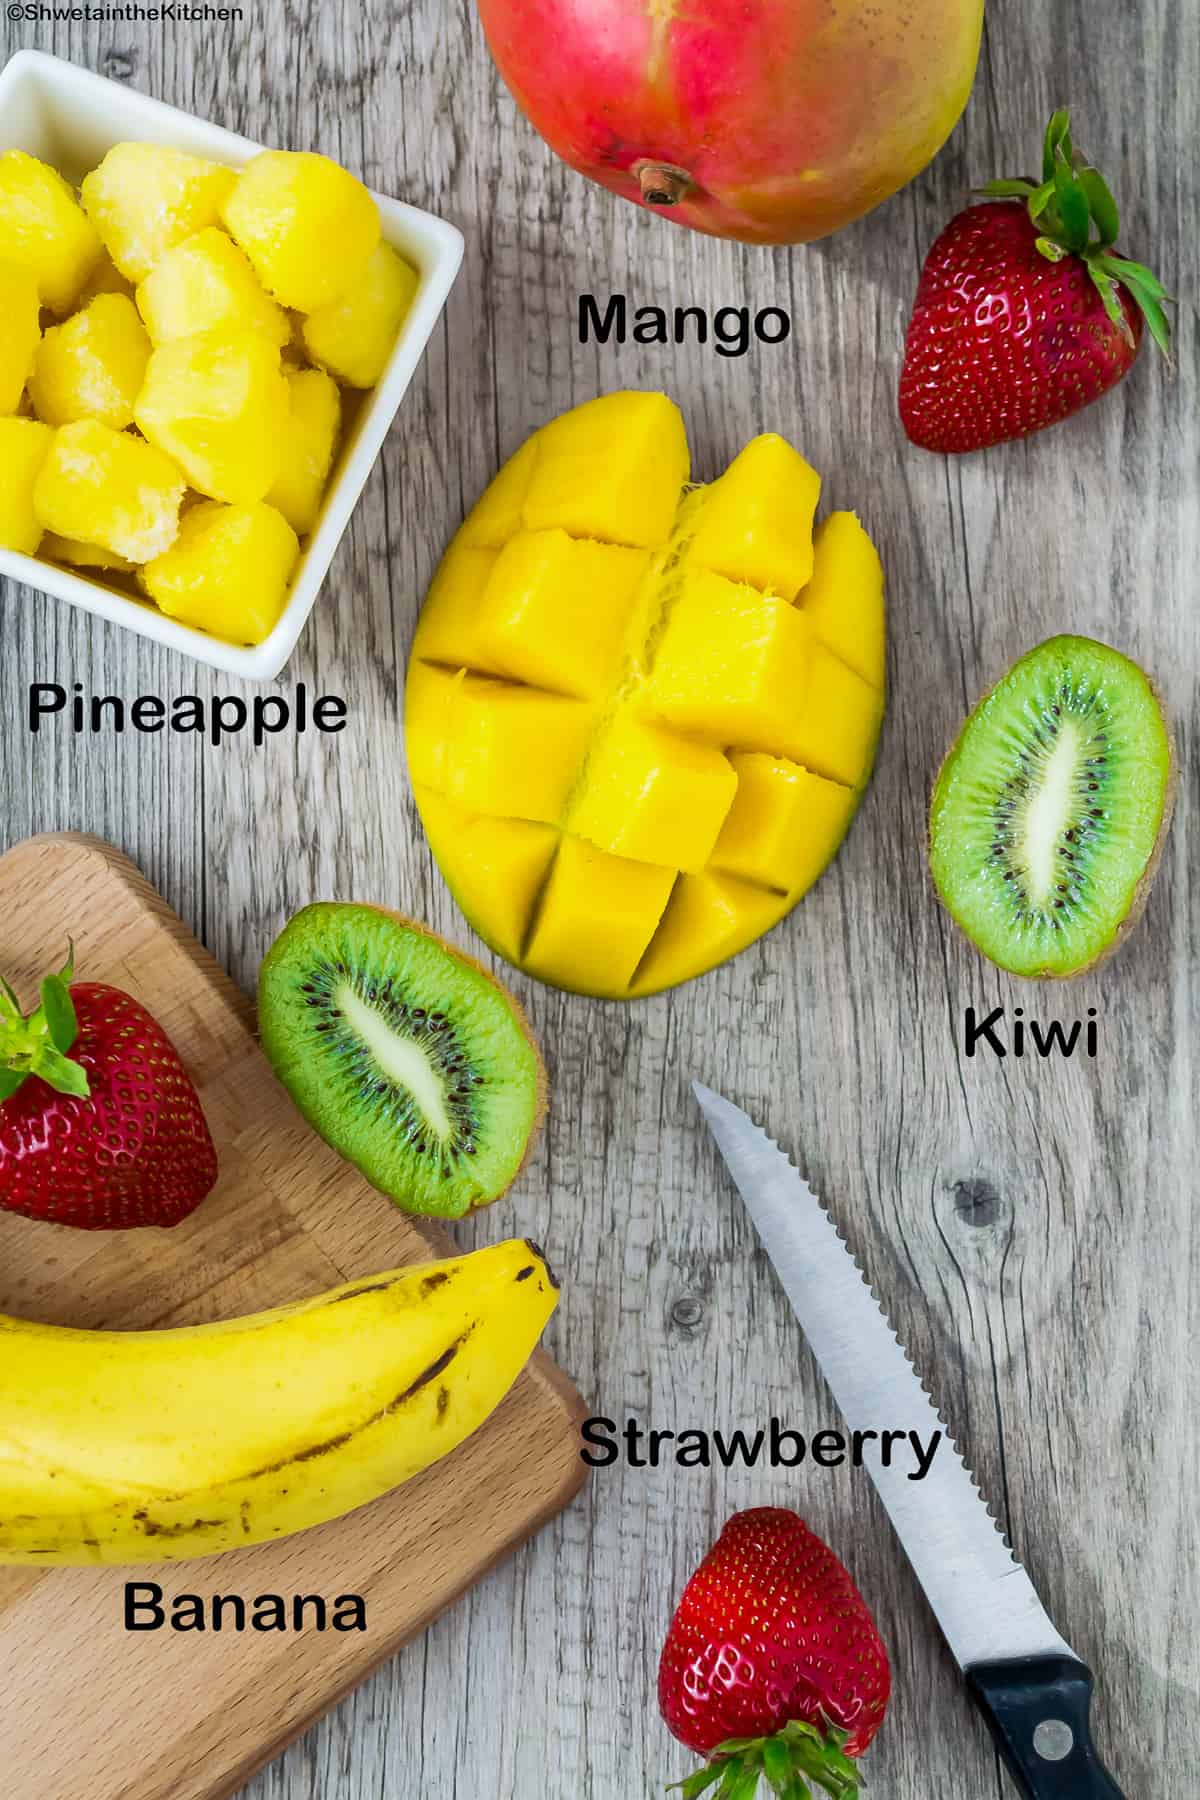 Top view of cut mango, kiwi, few strawberries, bowl of pineapple pieces and banana on cutting board